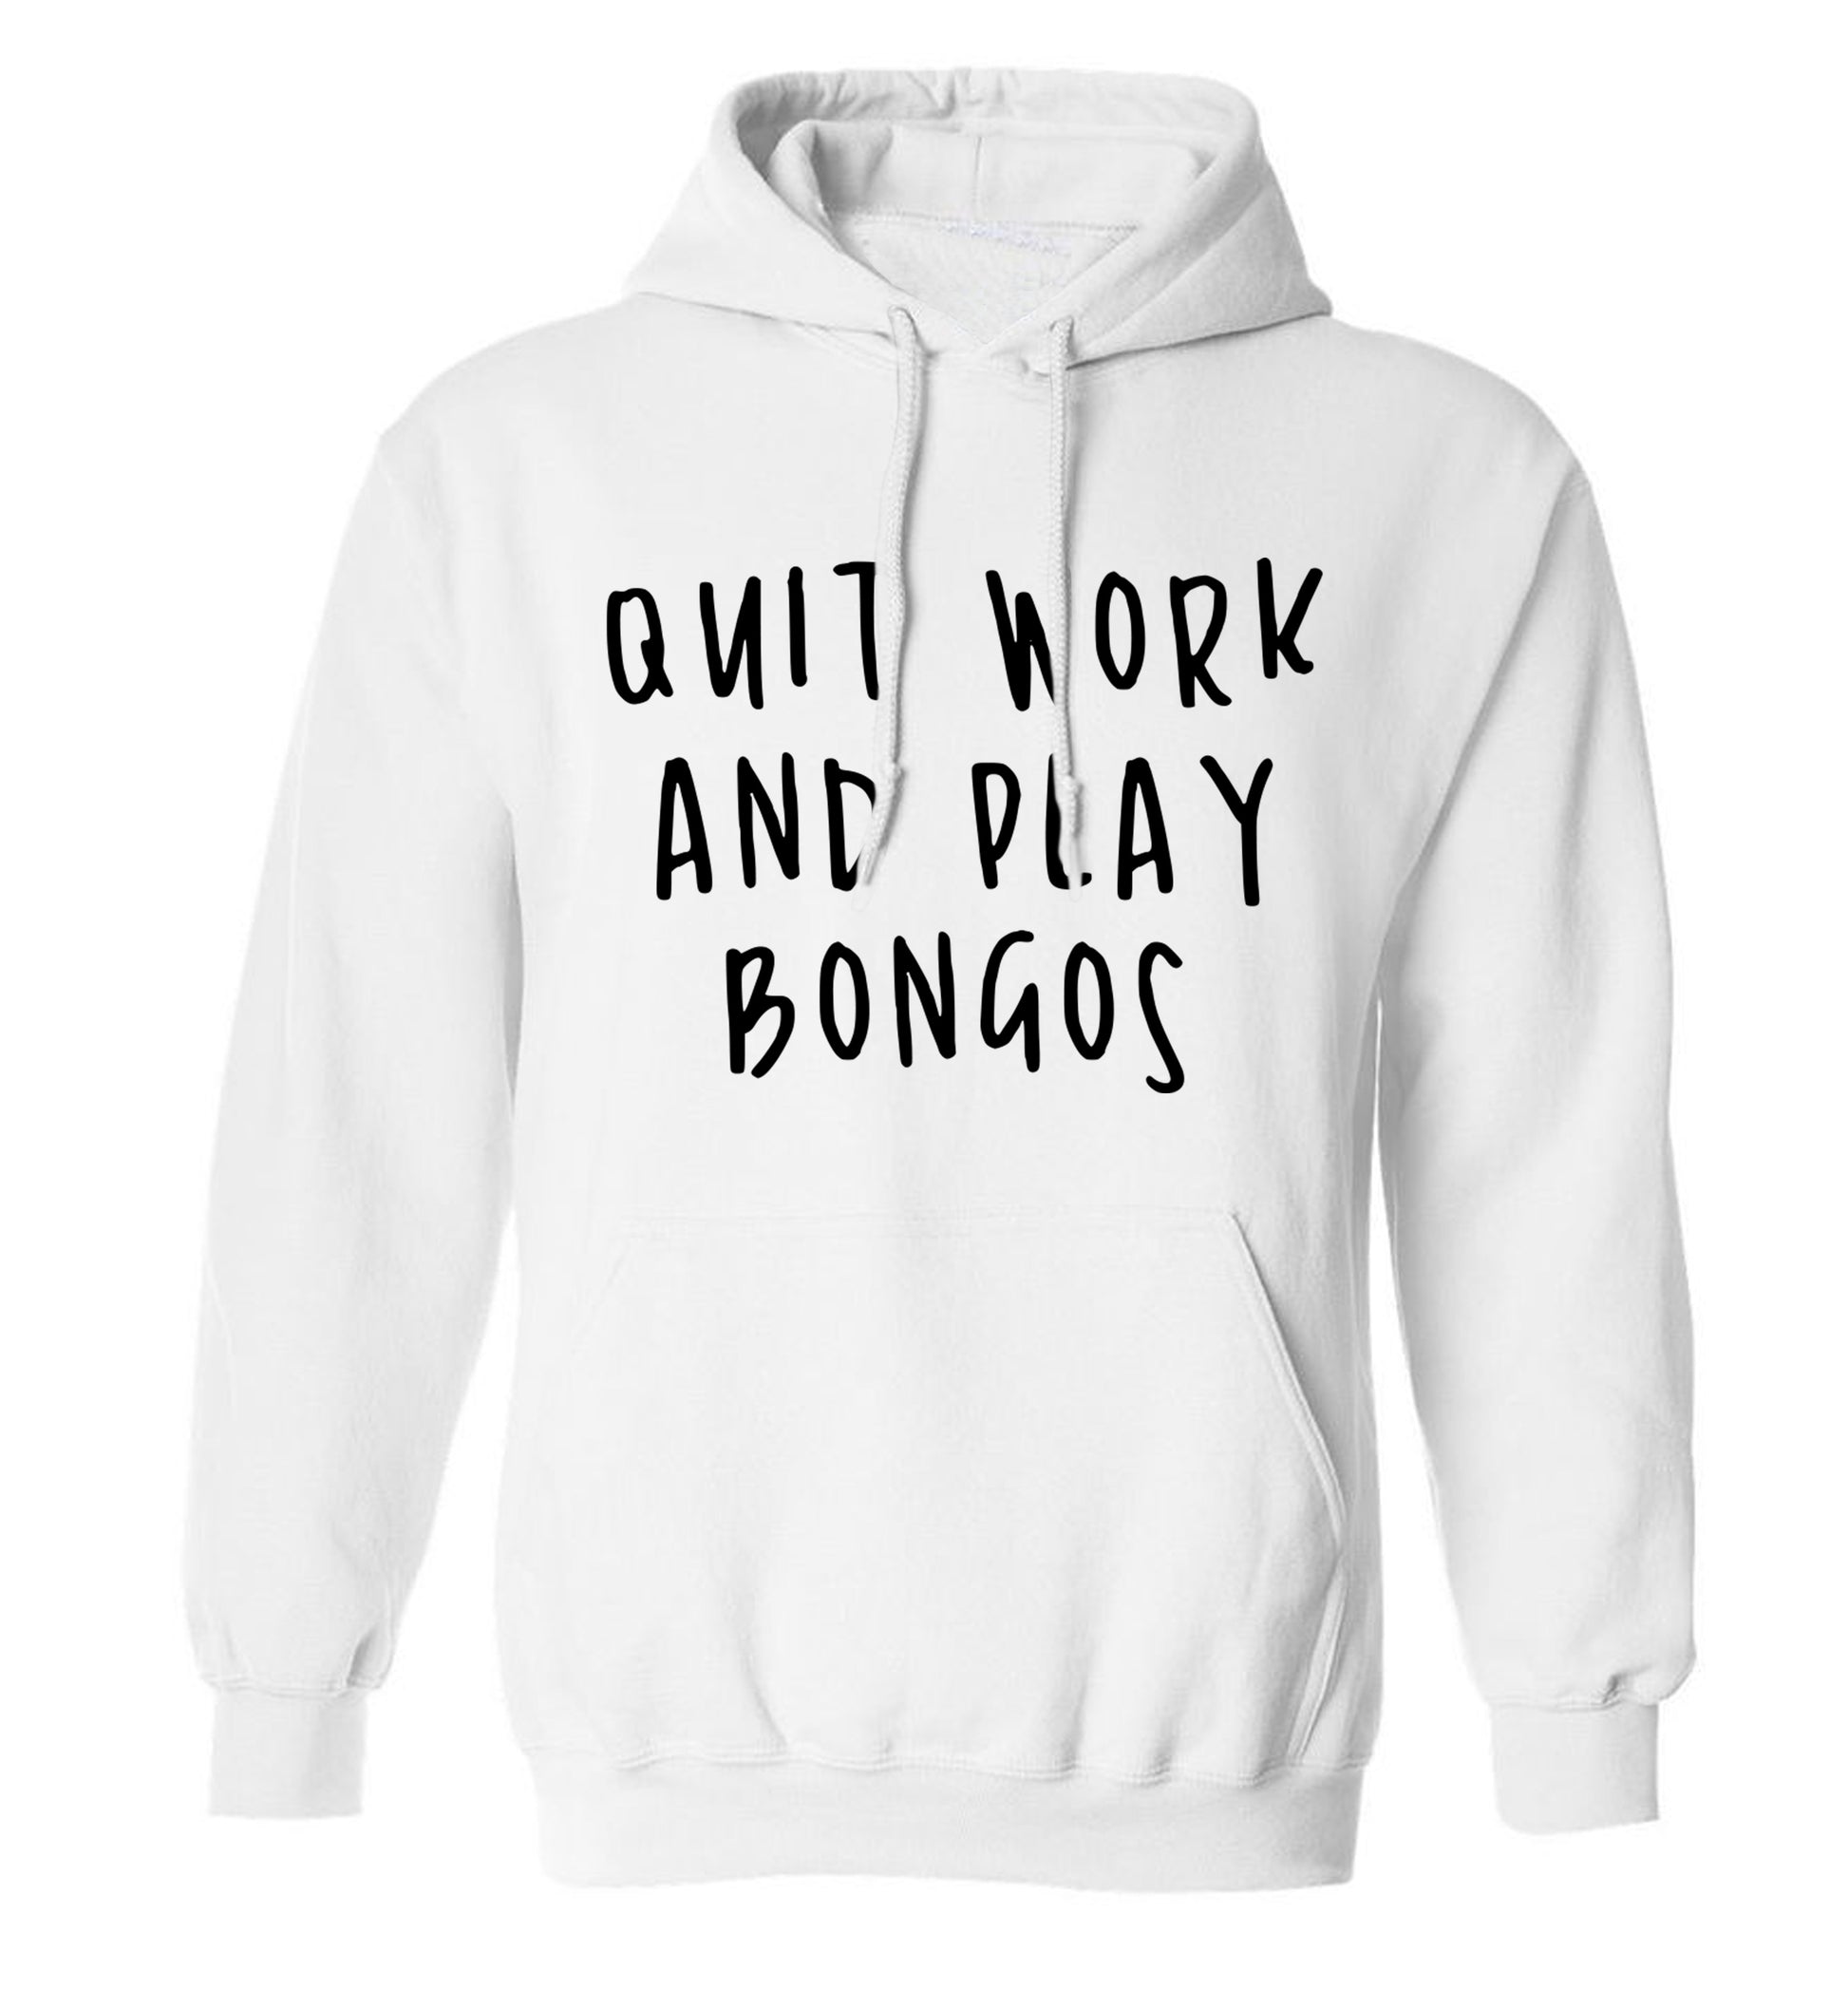 Quit work and play bongos adults unisex white hoodie 2XL